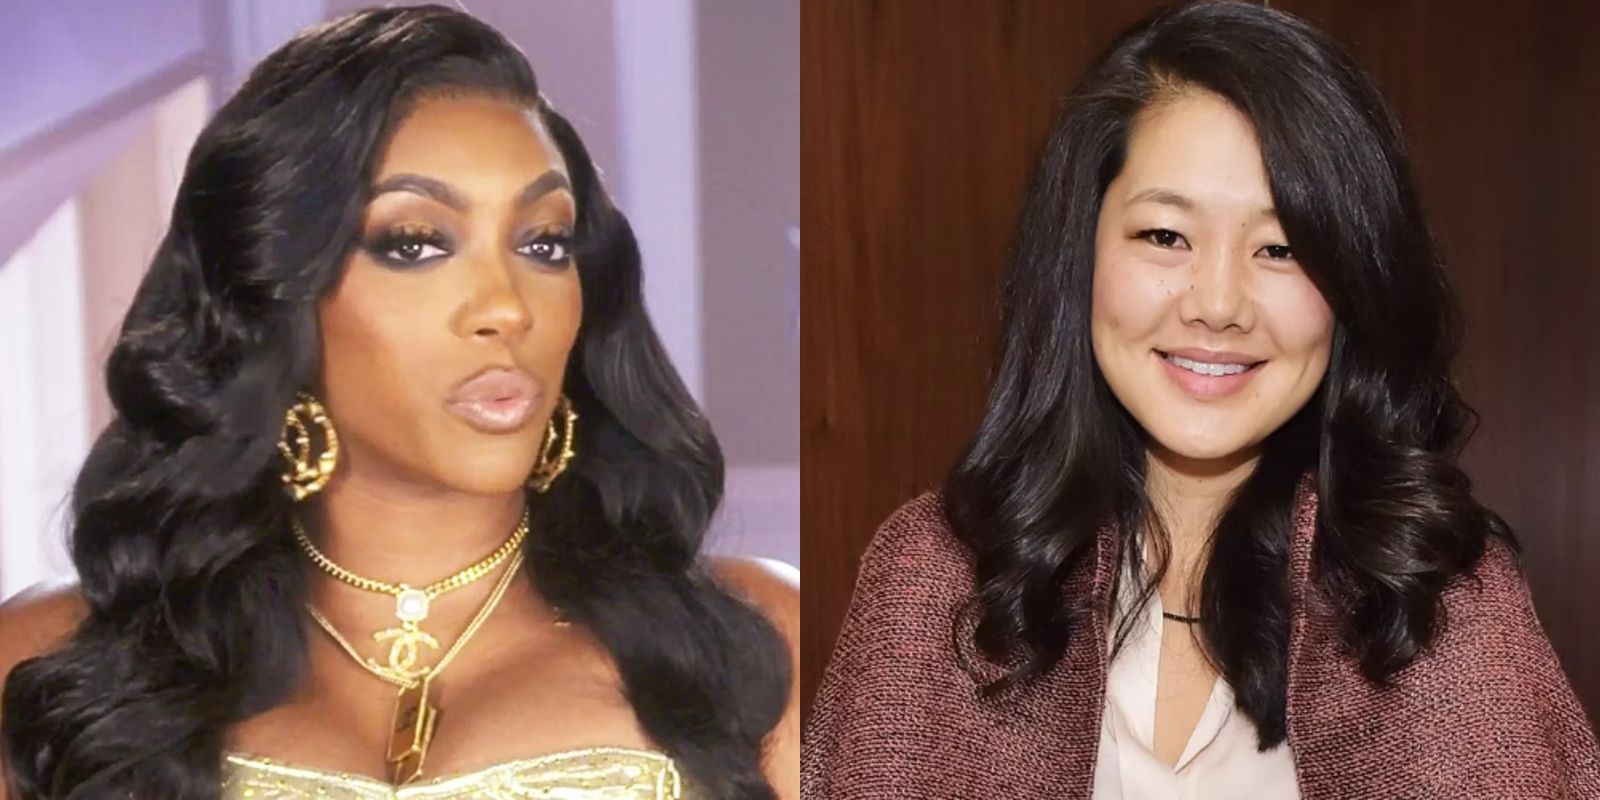 Real Housewives star Crystal Kung Minkoff and former Housewife Porsha Williams